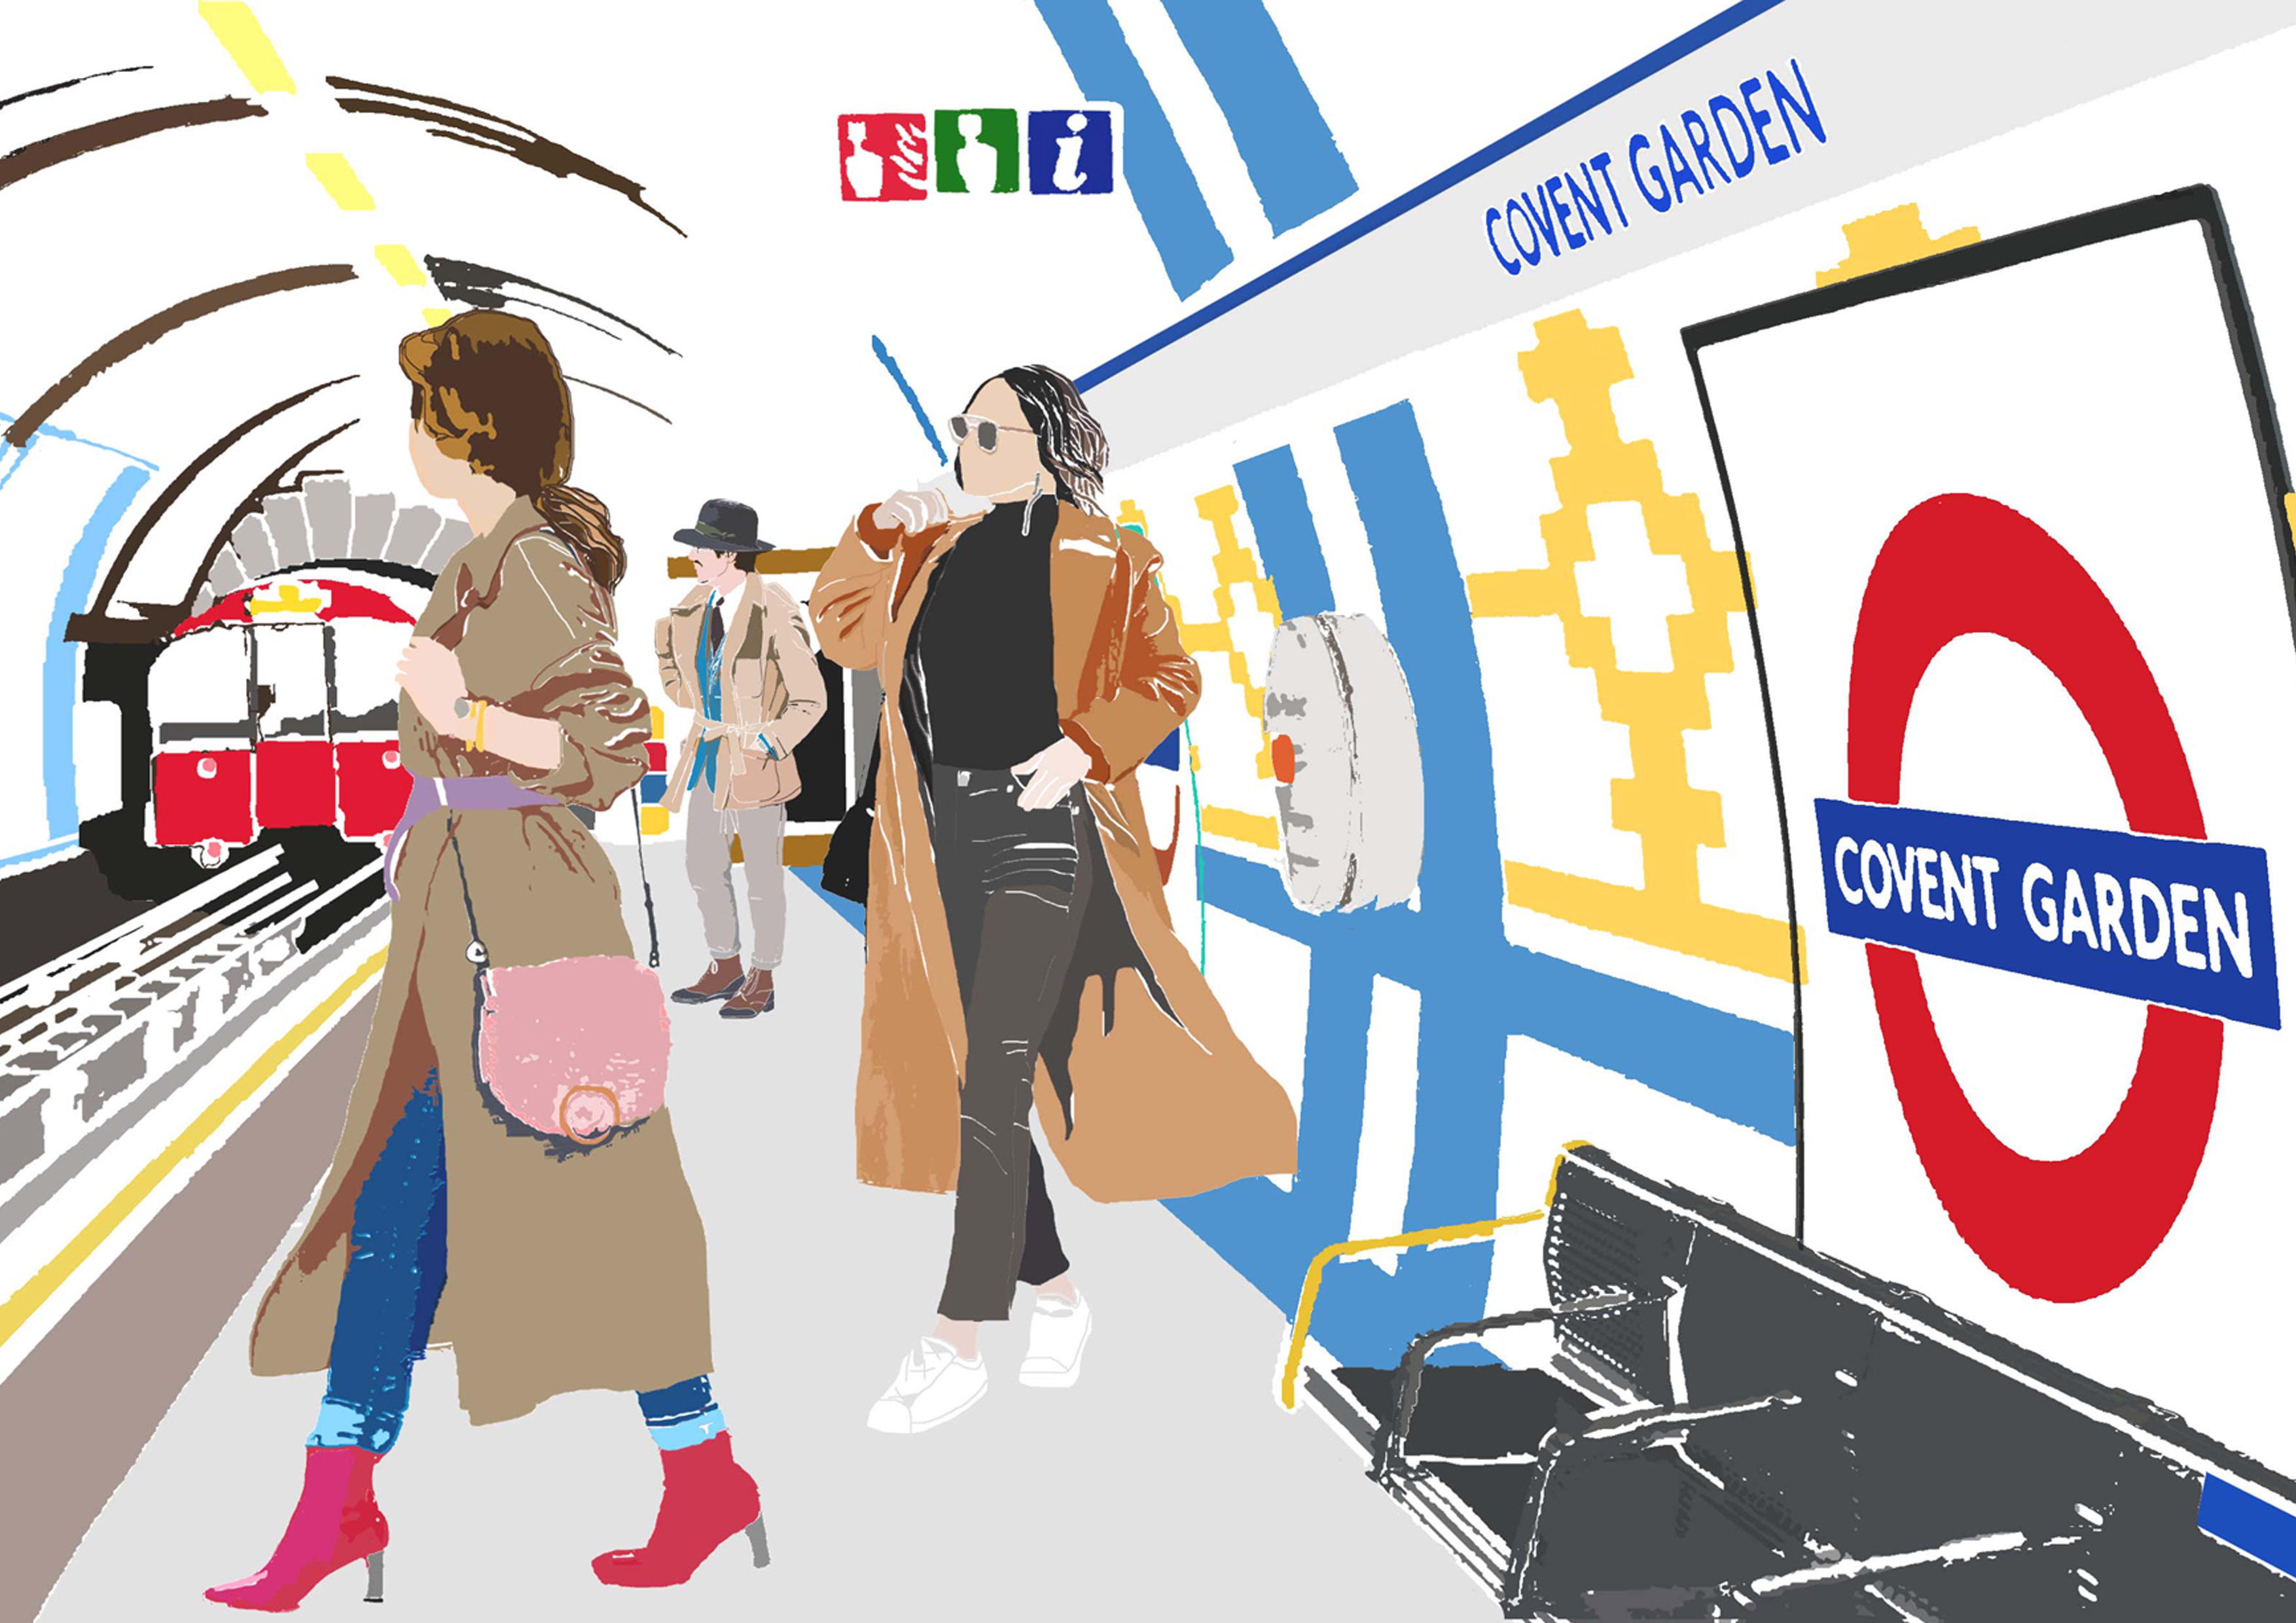 An illustration of the inside of Covent Garden tube station, illustrated by the brand Njeri illustrated. 